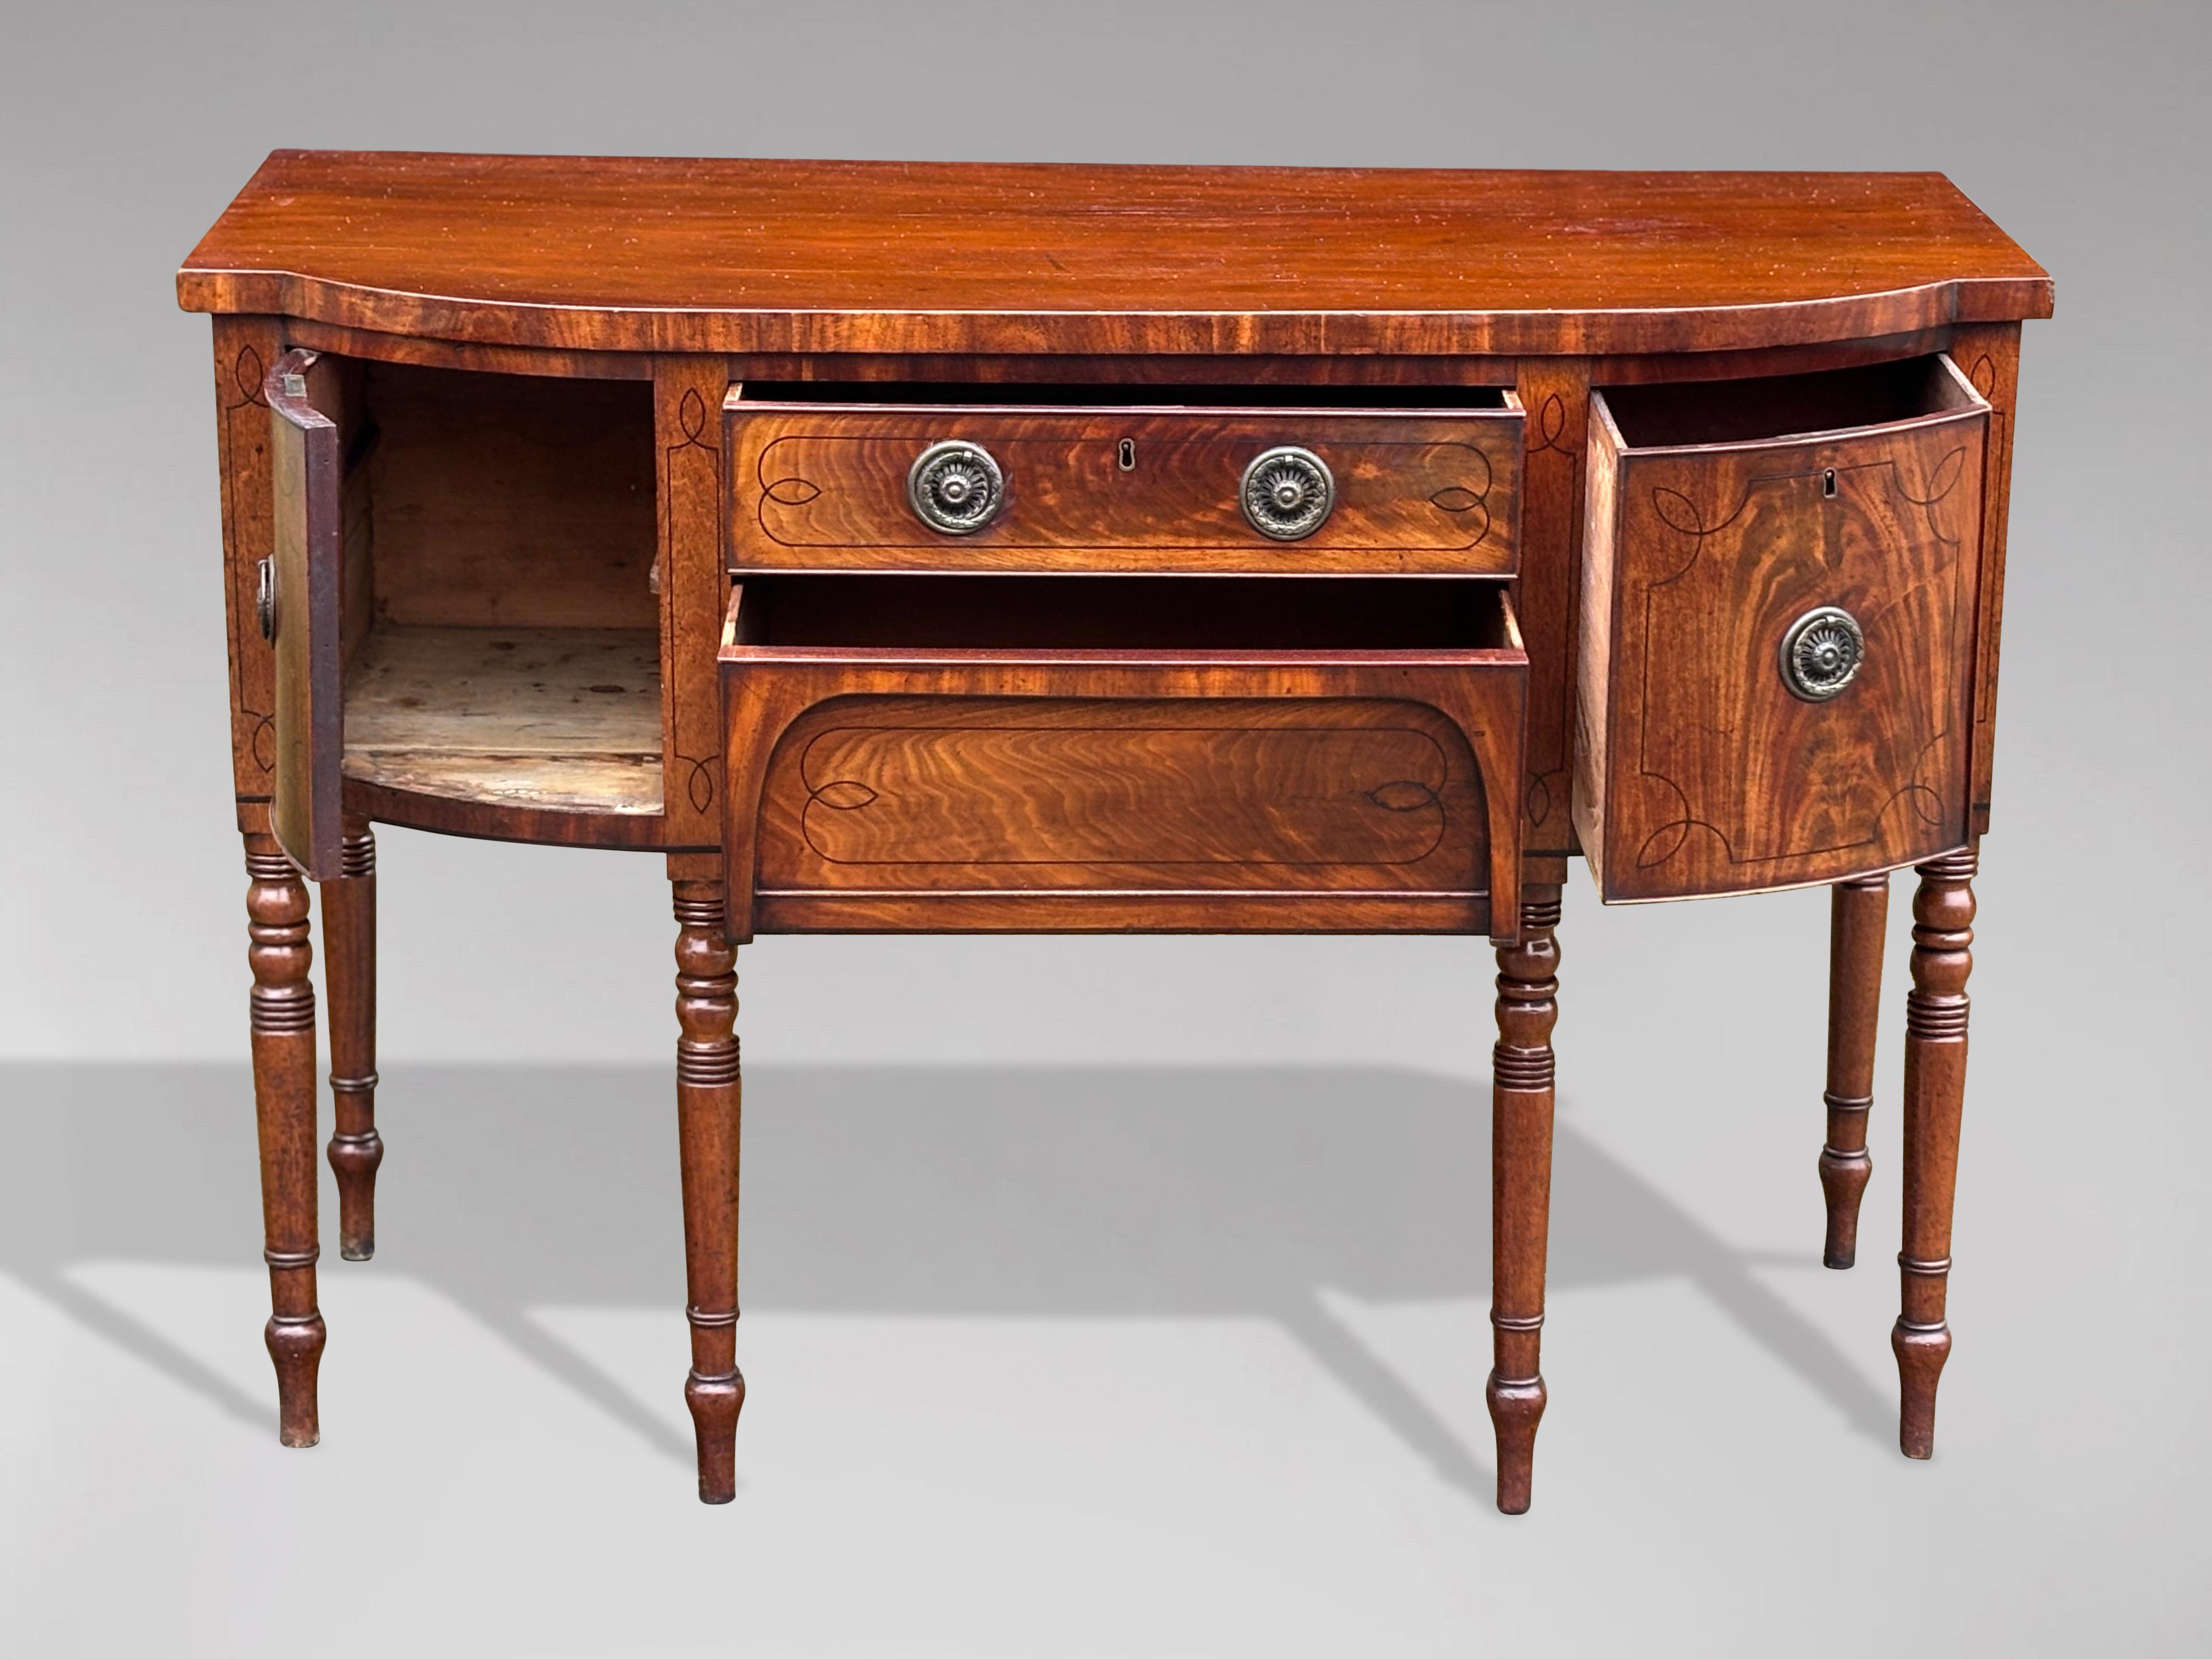 Polished Early 19th Century George III Period Sideboard For Sale